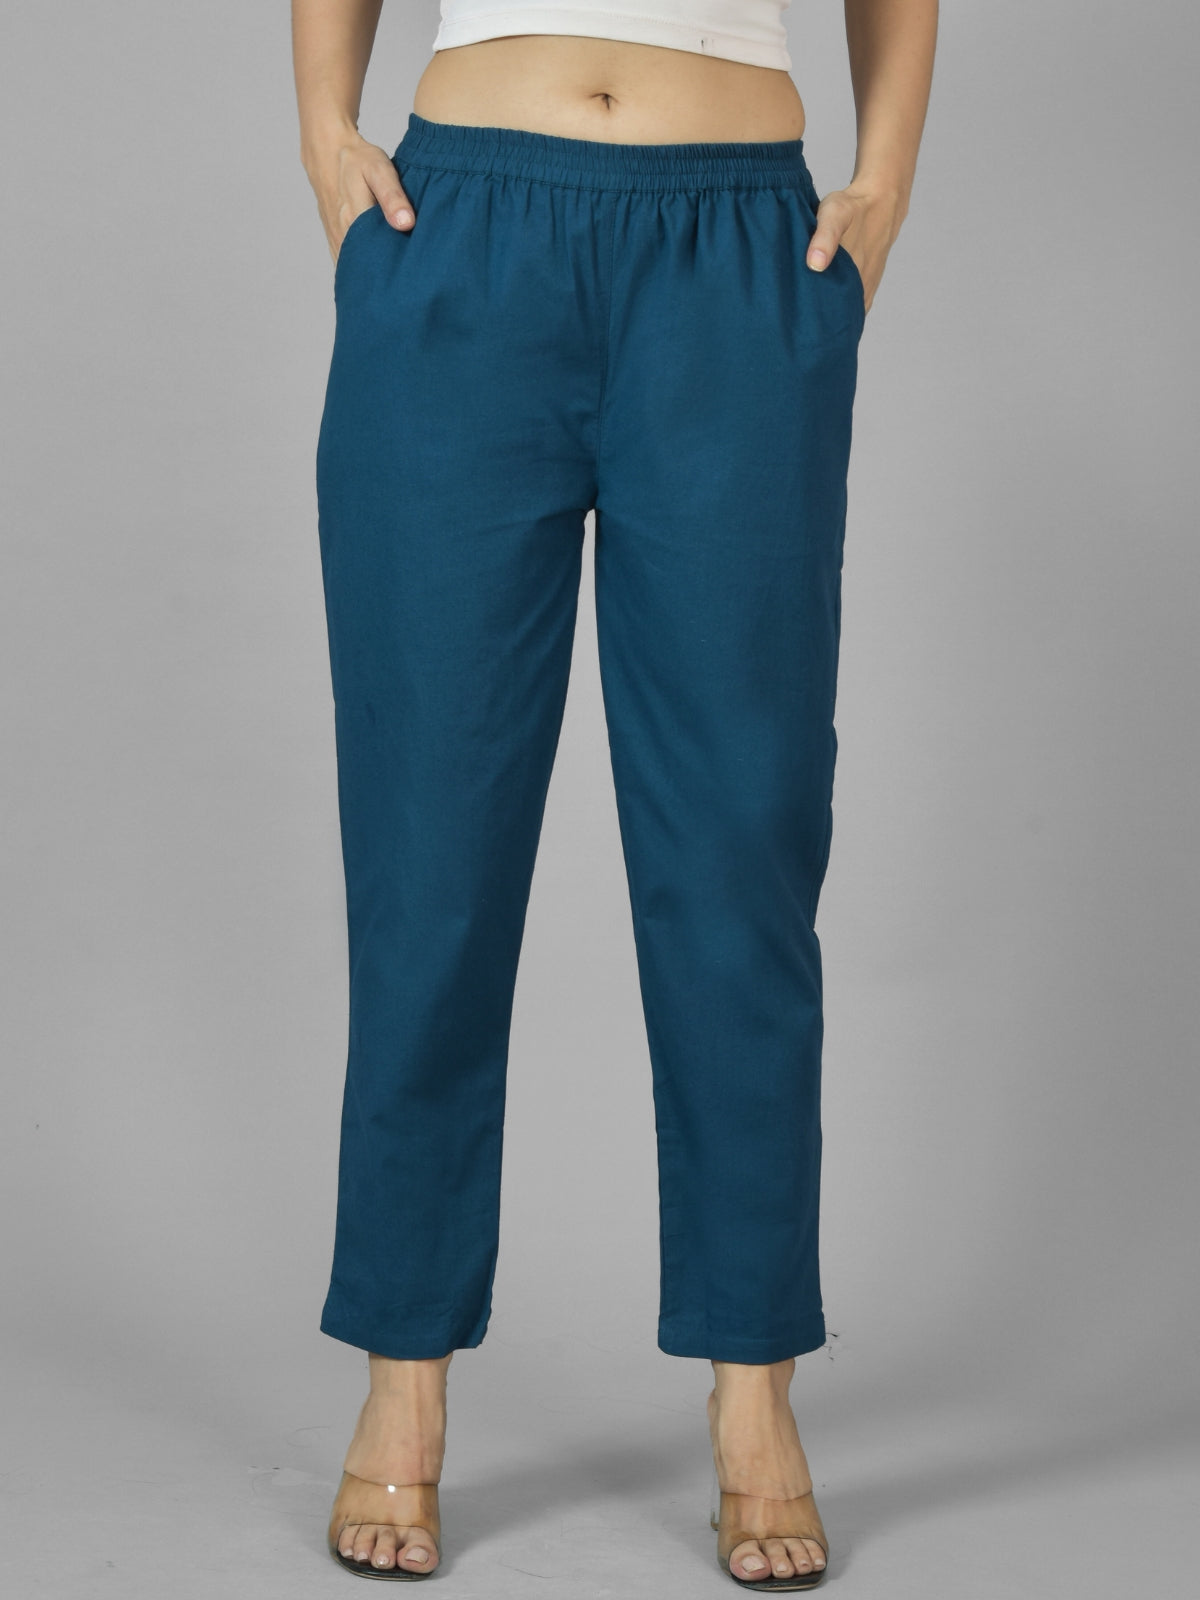 Pack Of 2 Womens Teal Blue And Wine Deep Pocket Fully Elastic Cotton Trouser